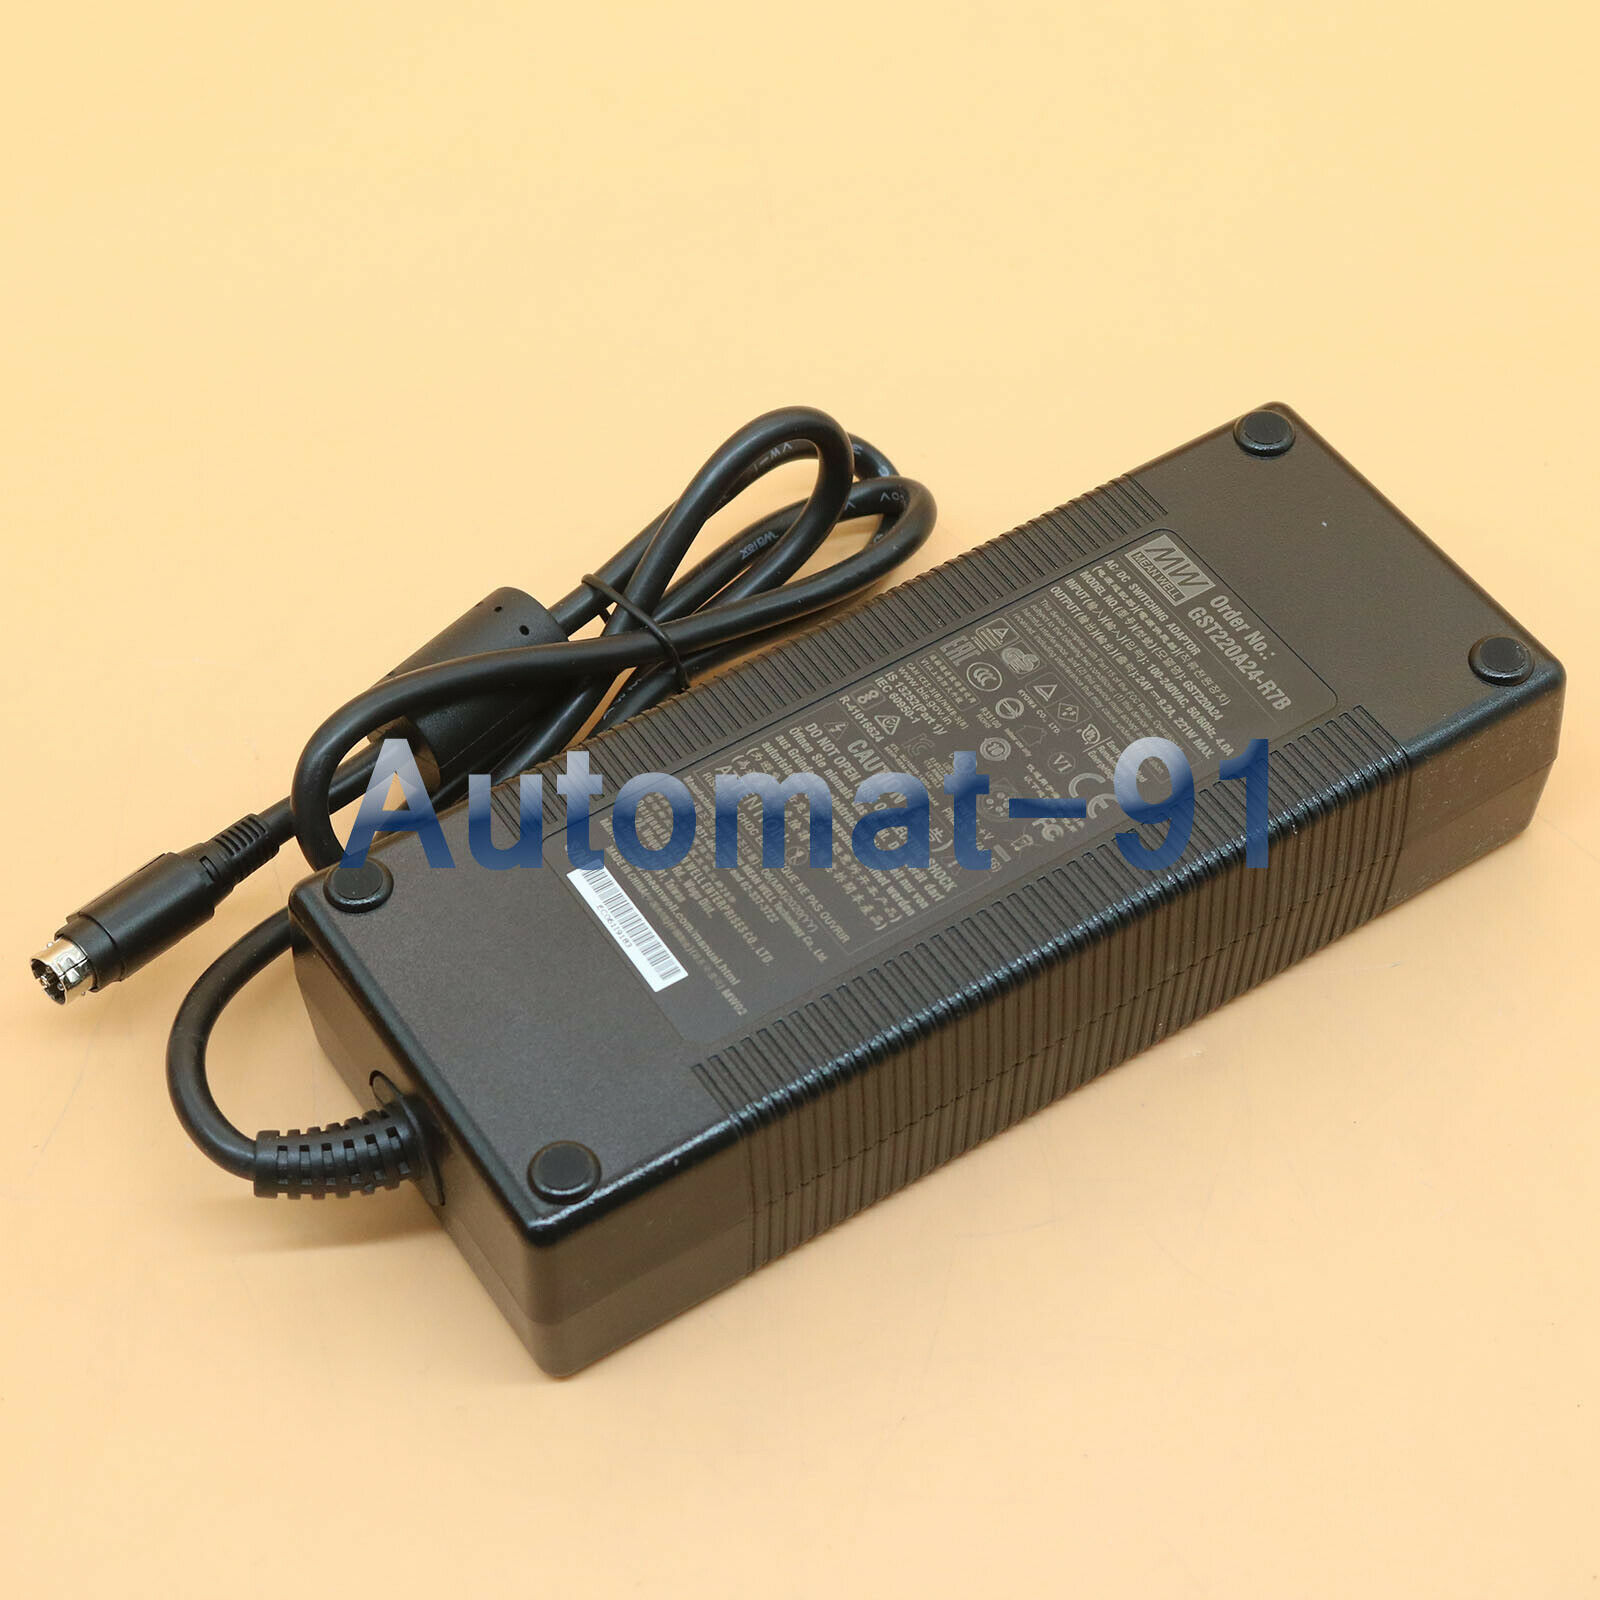 AC Adapter for Fargo DTC4000 DTC1250e ID Card Printer Power Supply Charger Technical Specifications: Construction: 100%